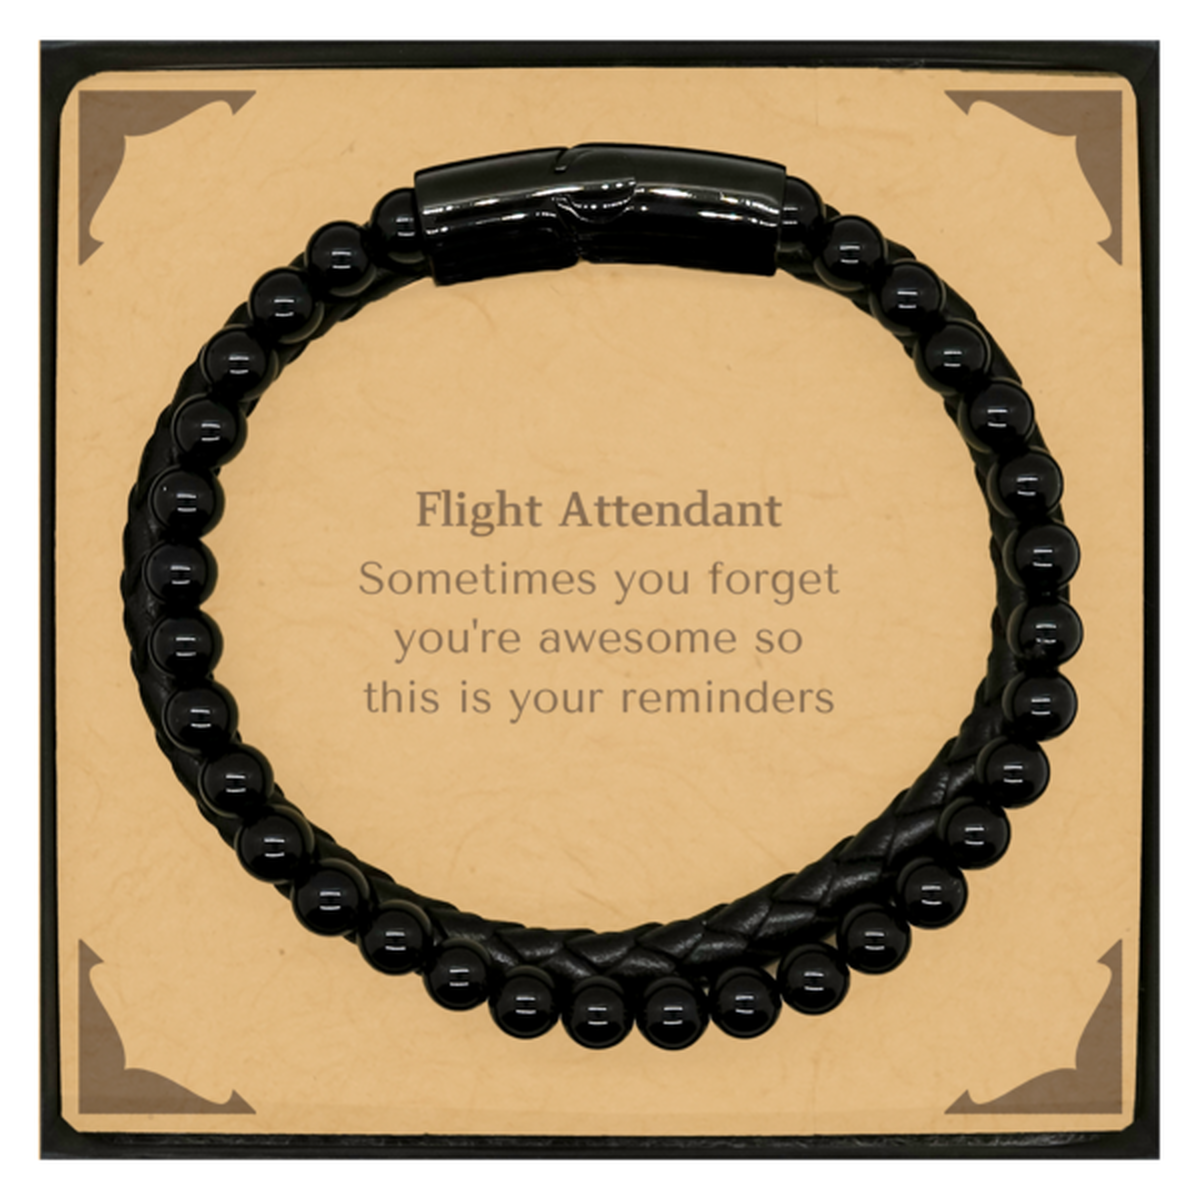 Sentimental Flight Attendant Stone Leather Bracelets, Flight Attendant Sometimes you forget you're awesome so this is your reminders, Graduation Christmas Birthday Gifts for Flight Attendant, Men, Women, Coworkers